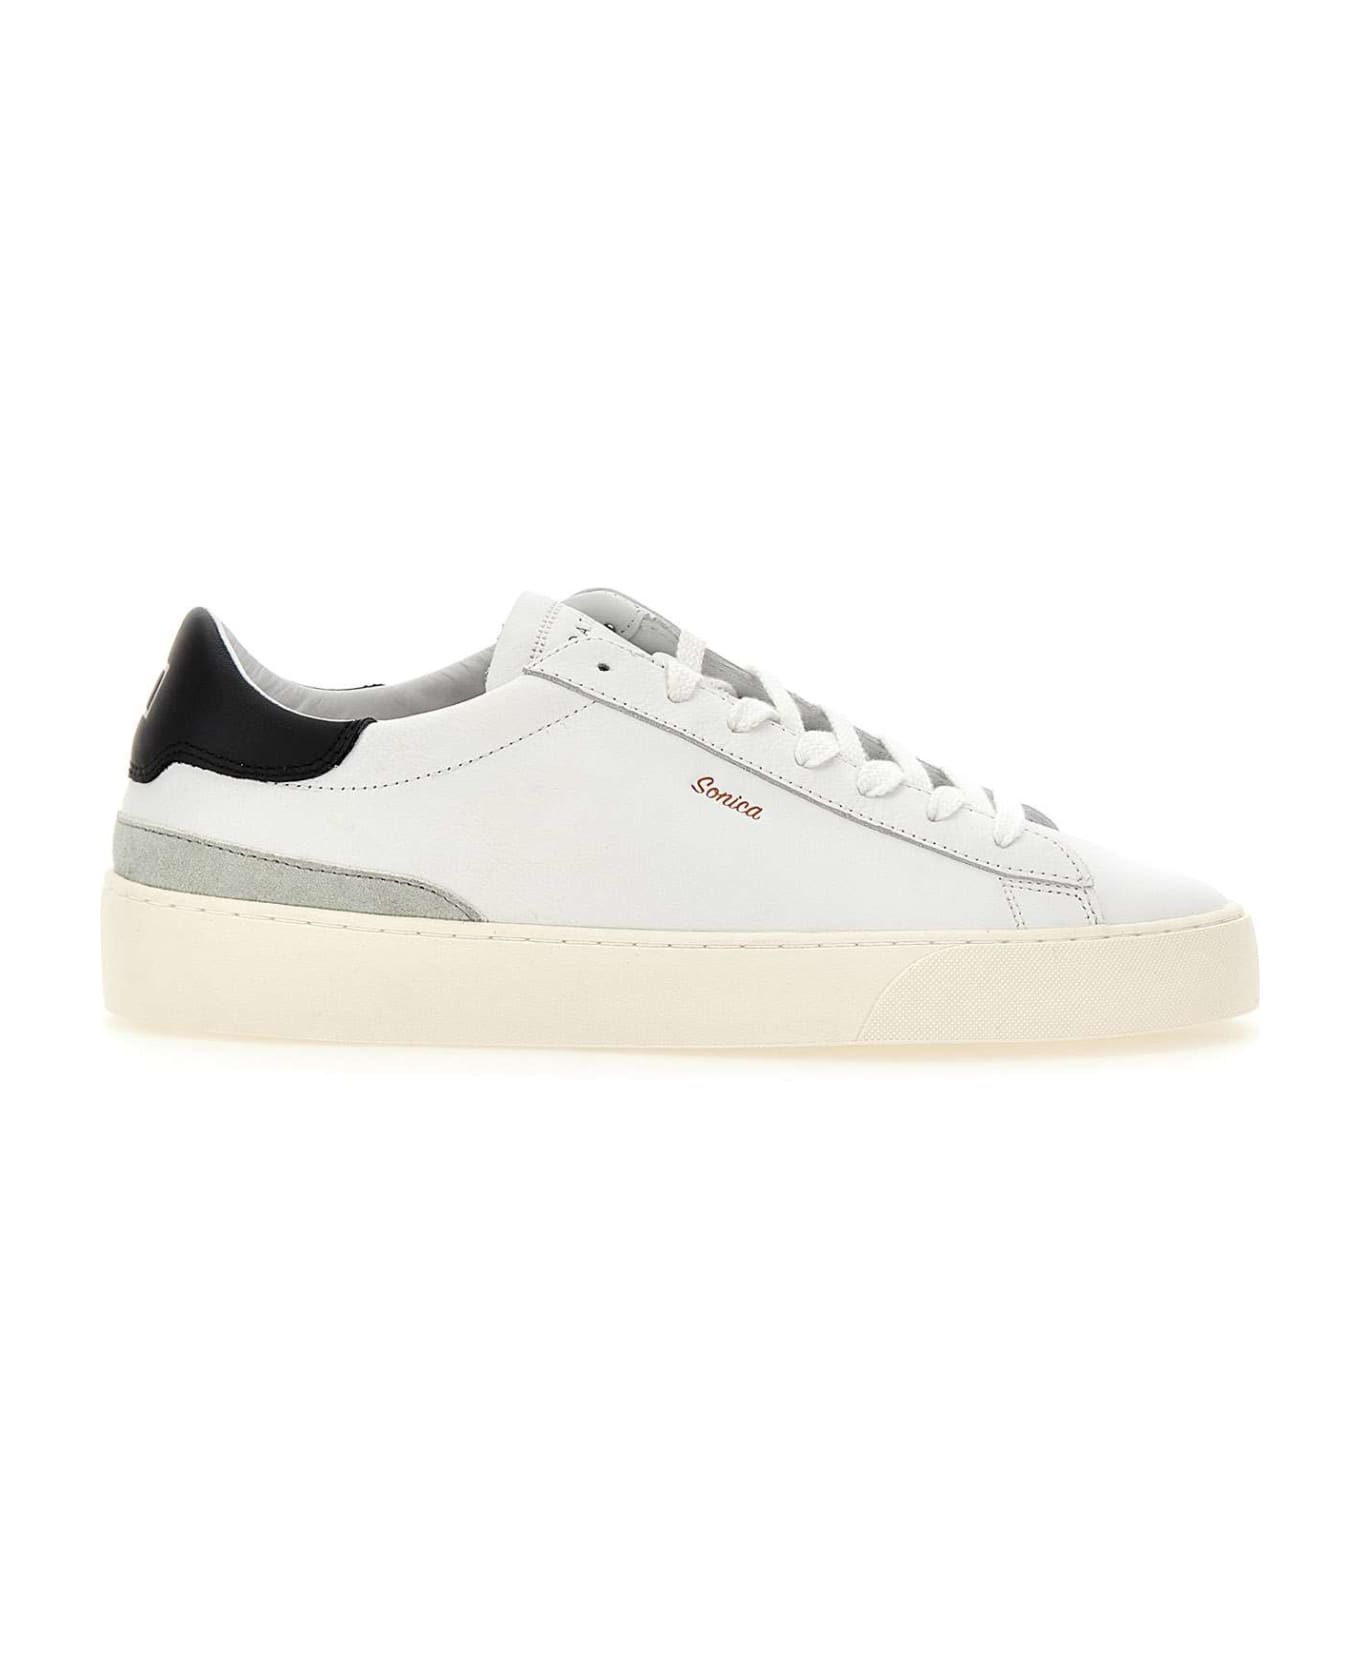 D.A.T.E. "sonica Calf" Leather Sneakers - WHITE スニーカー